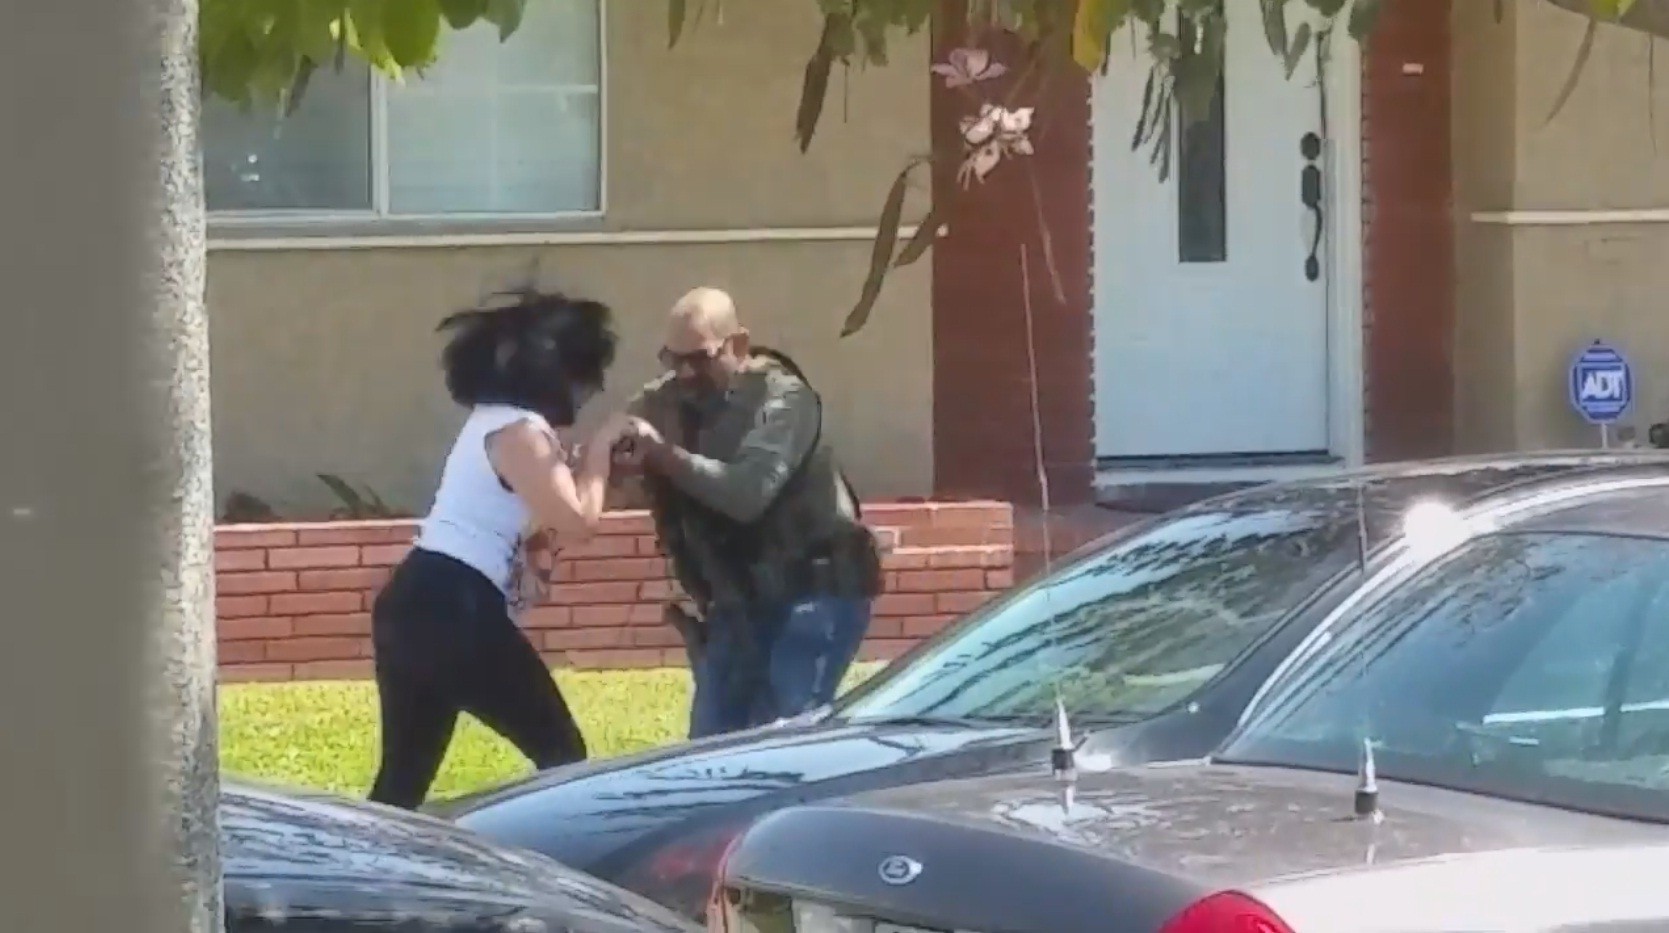 Feds probe video showing officer slamming woman's phone in South Gate